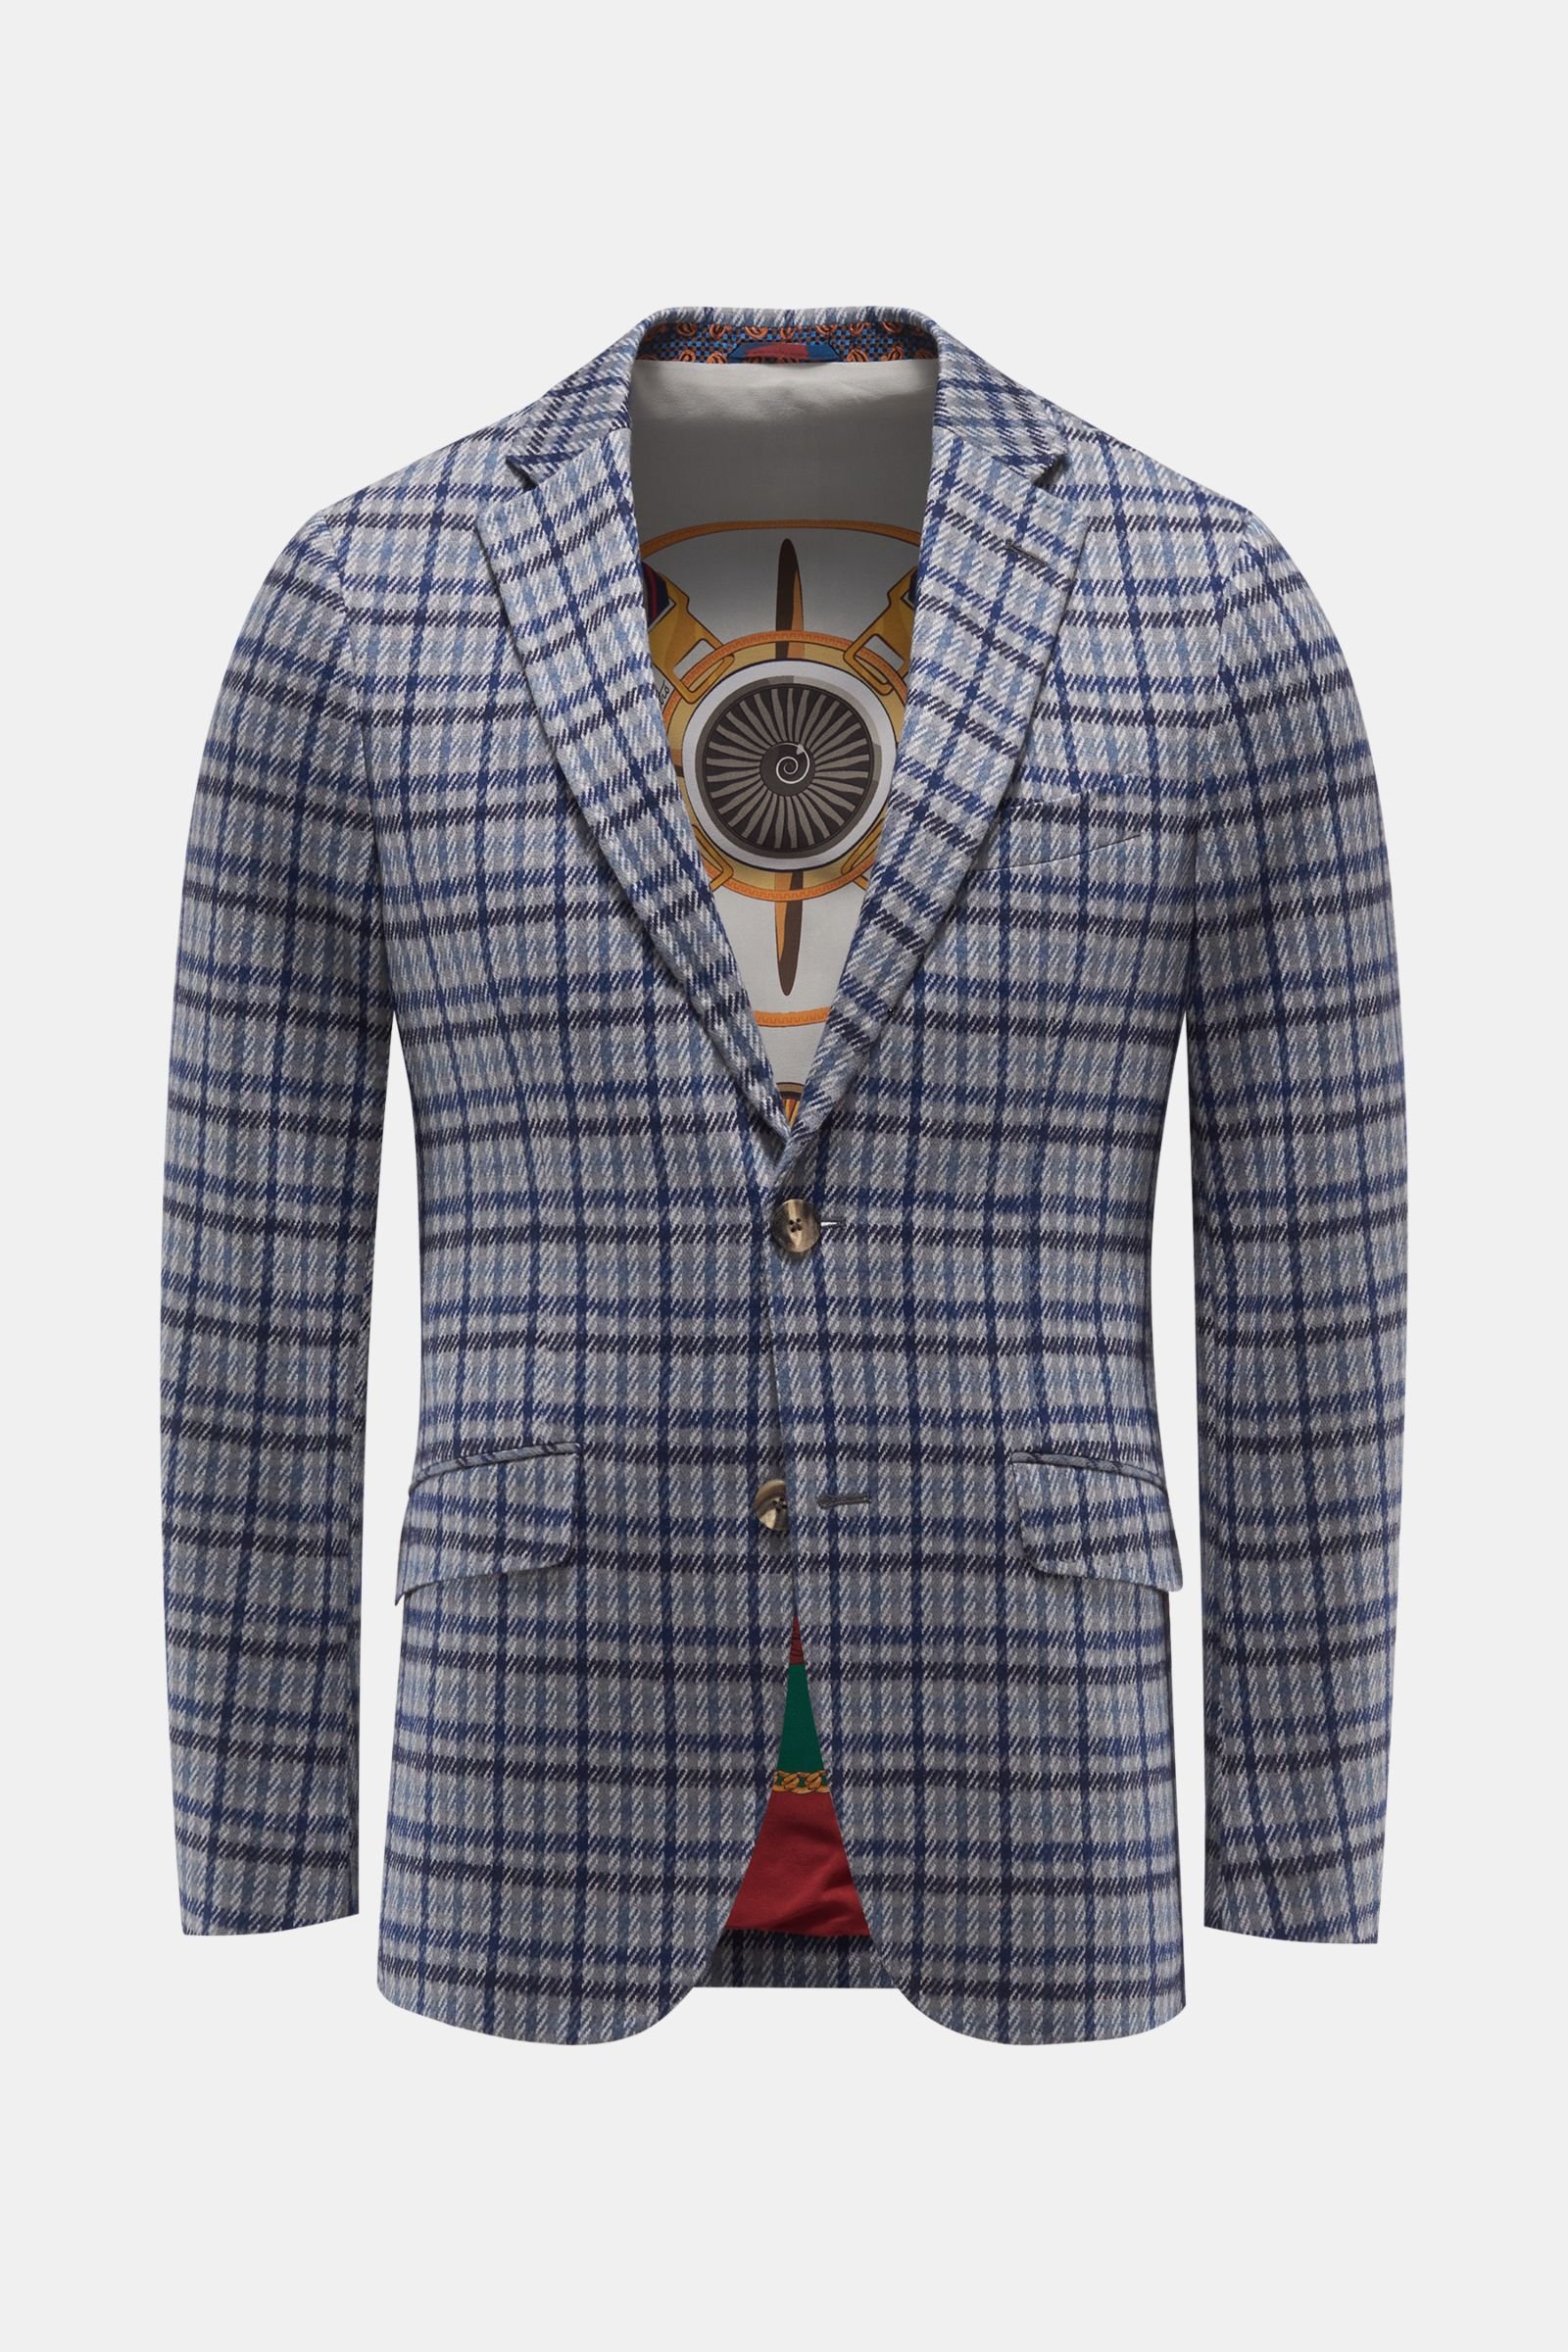 Jersey smart-casual jacket grey/navy checked